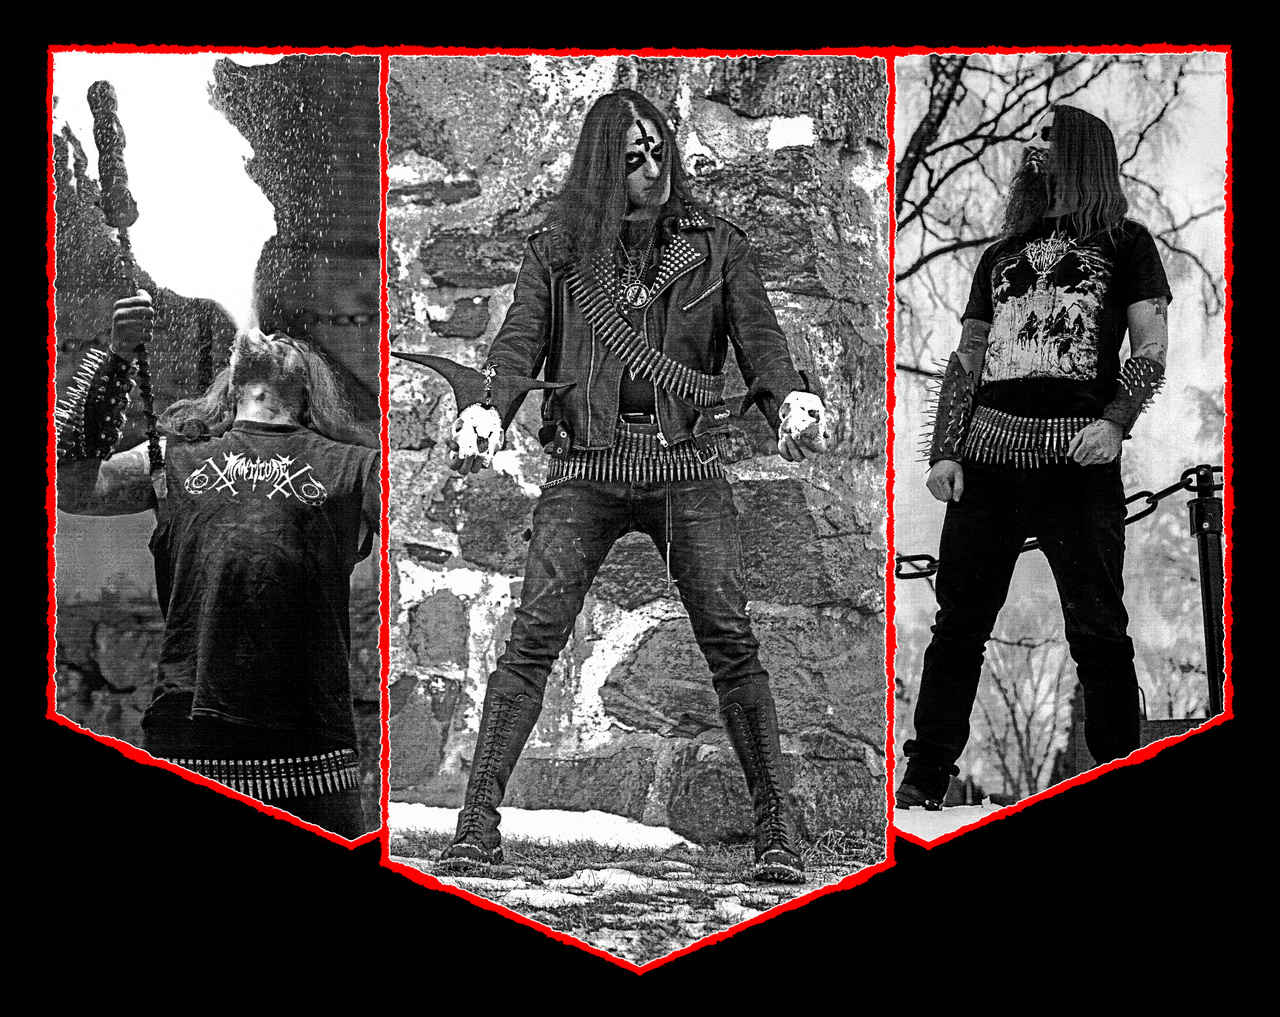 Archgoat members (Click to see larger picture)